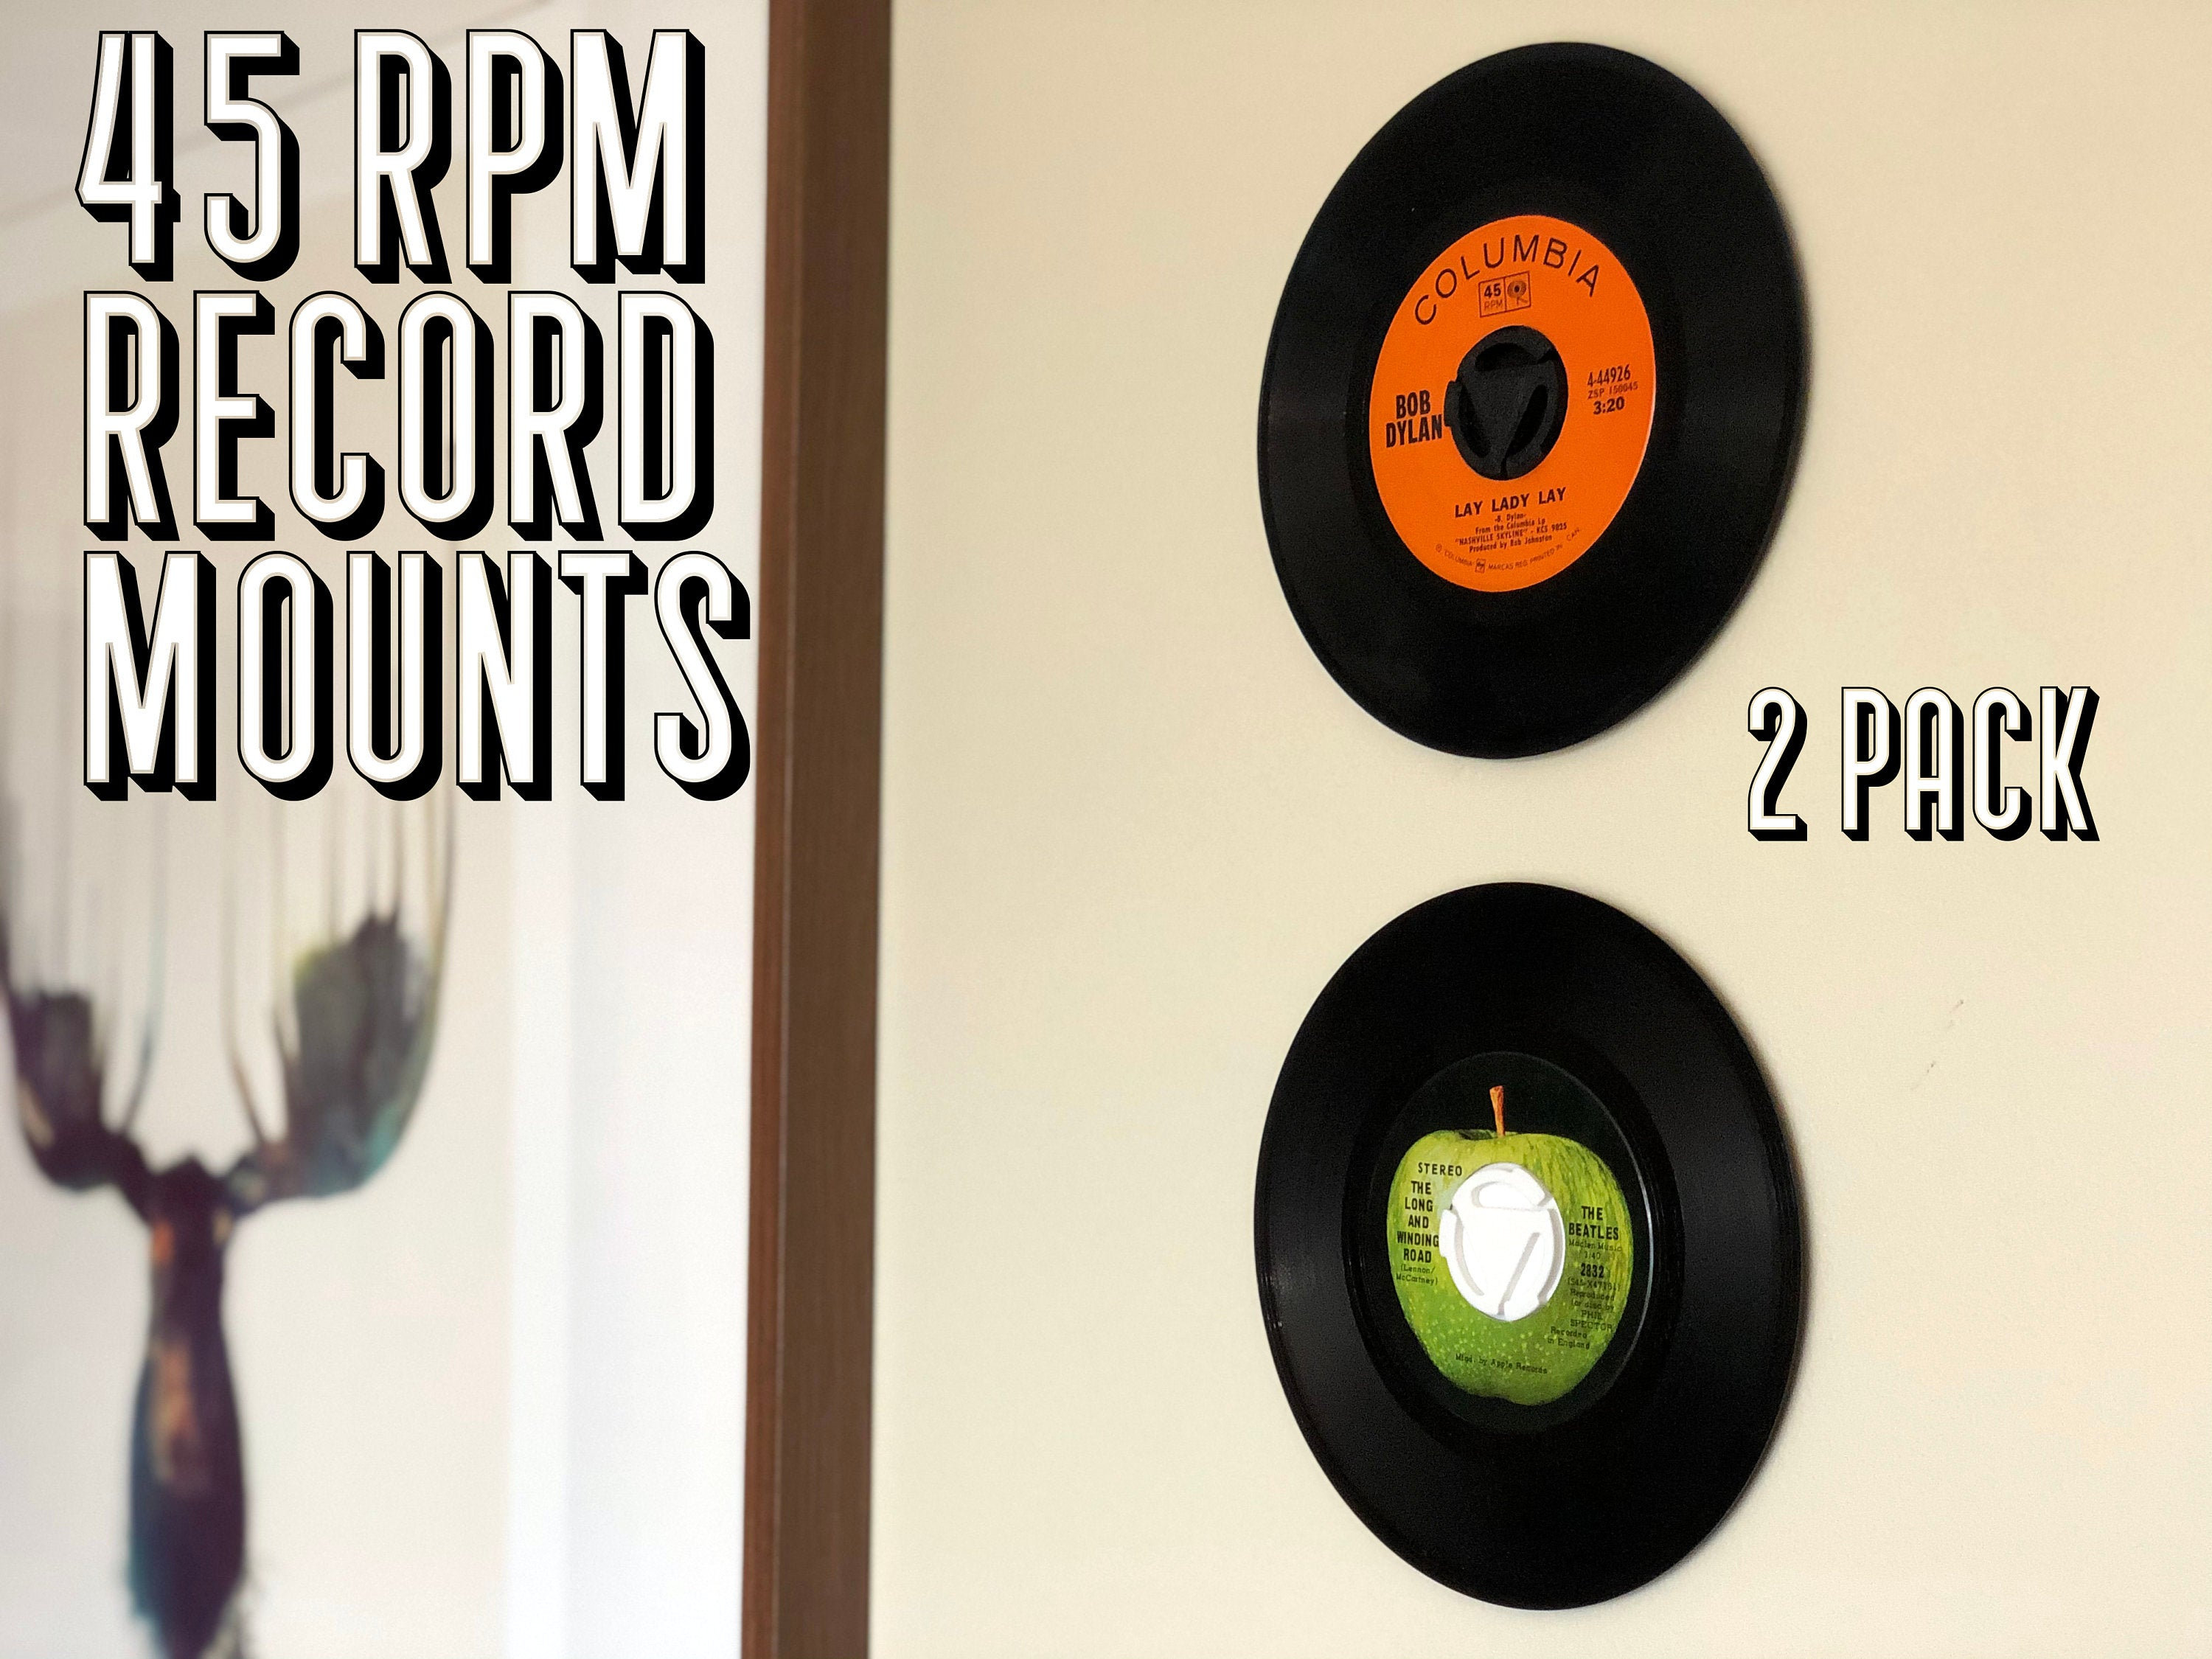 Wall Mount Record Holder, Vinyl Record Holder with 3M command strip